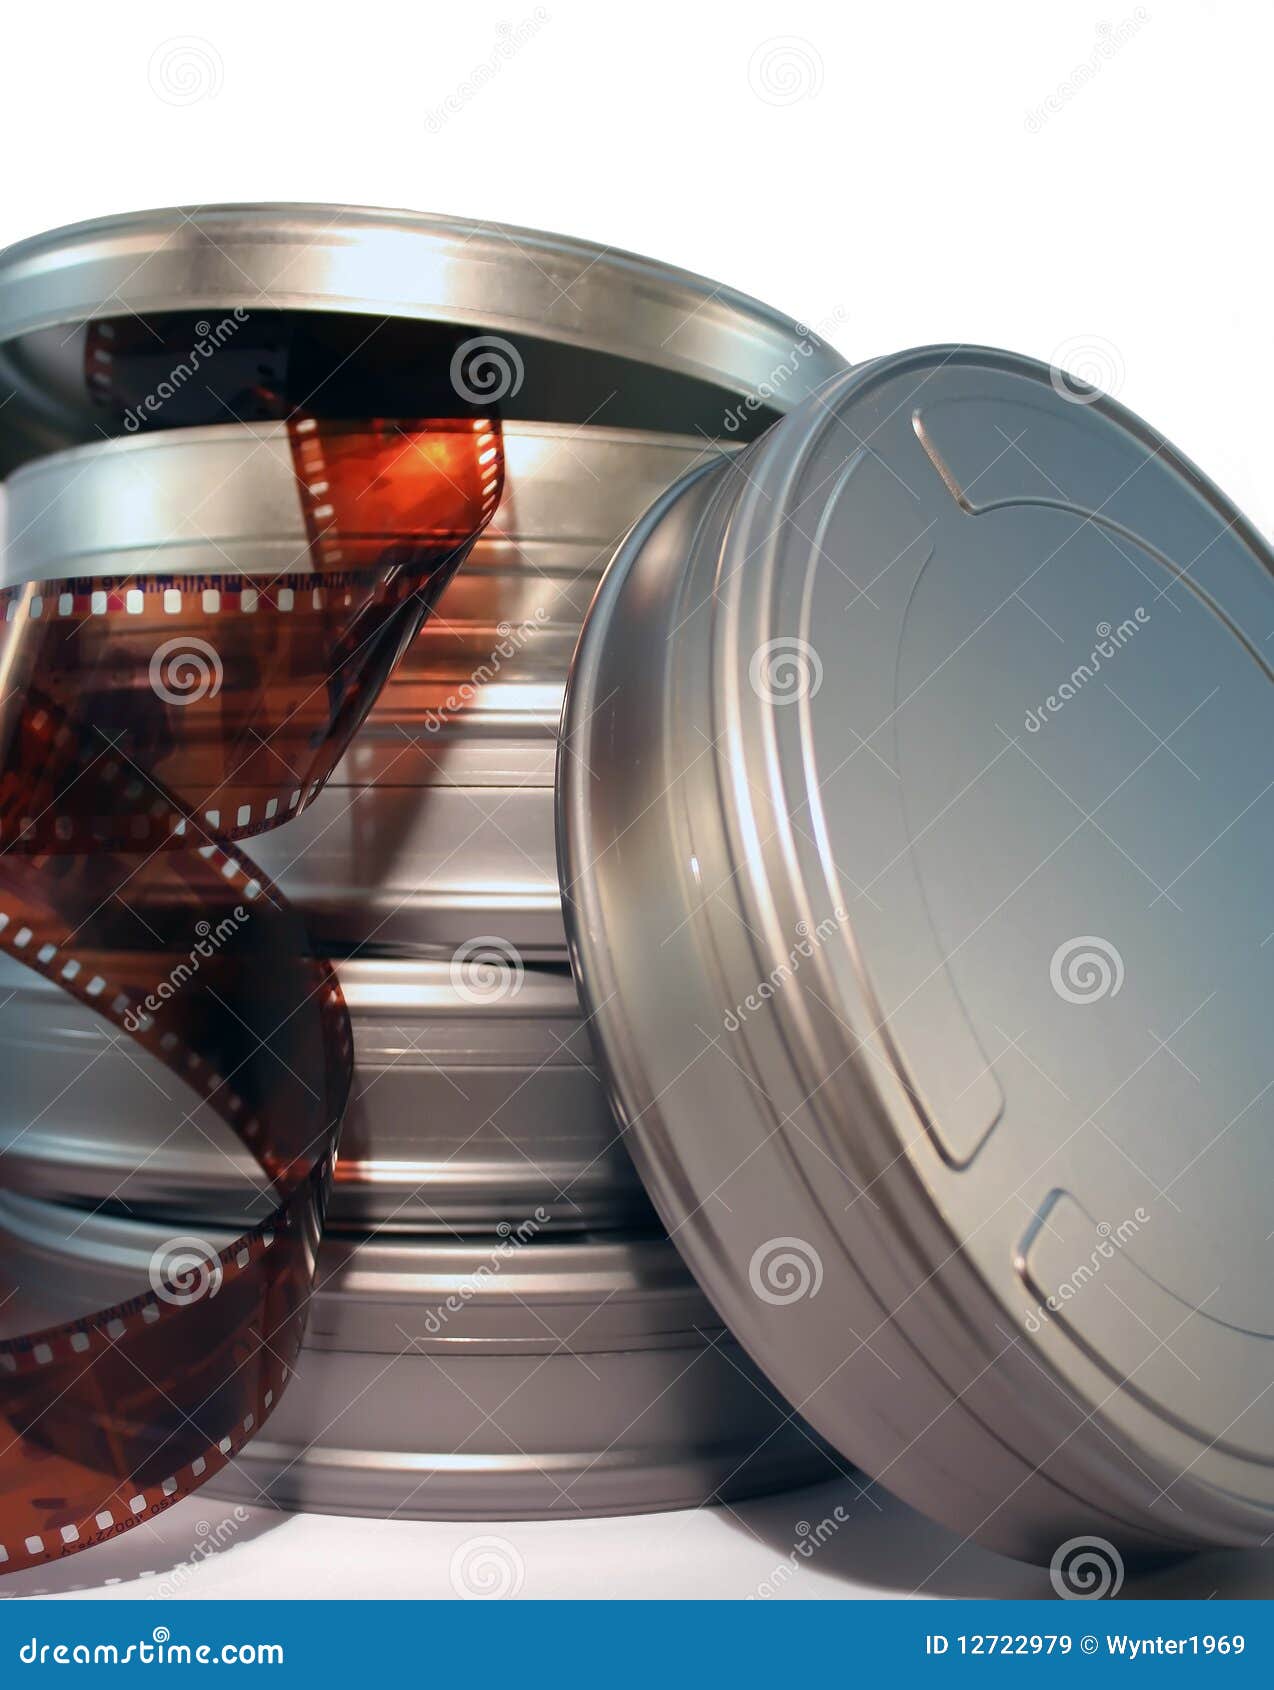 https://thumbs.dreamstime.com/z/film-canisters-12722979.jpg